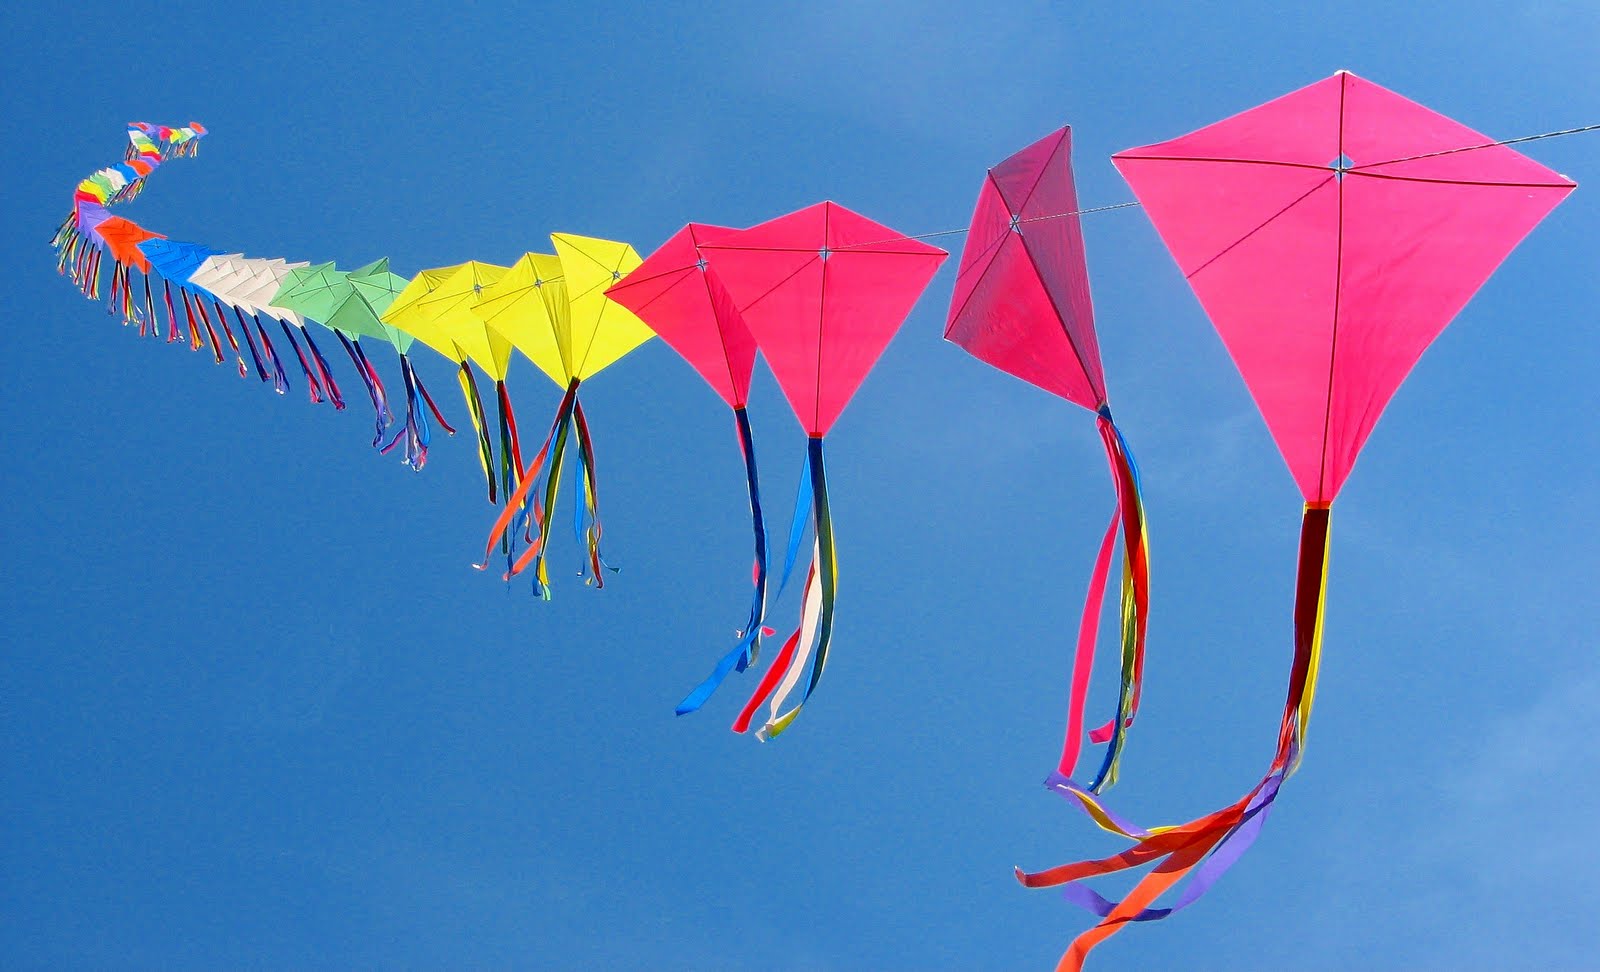 Kites Hd Wallpapers Hd Wallpapers High Definition Fre - vrogue.co